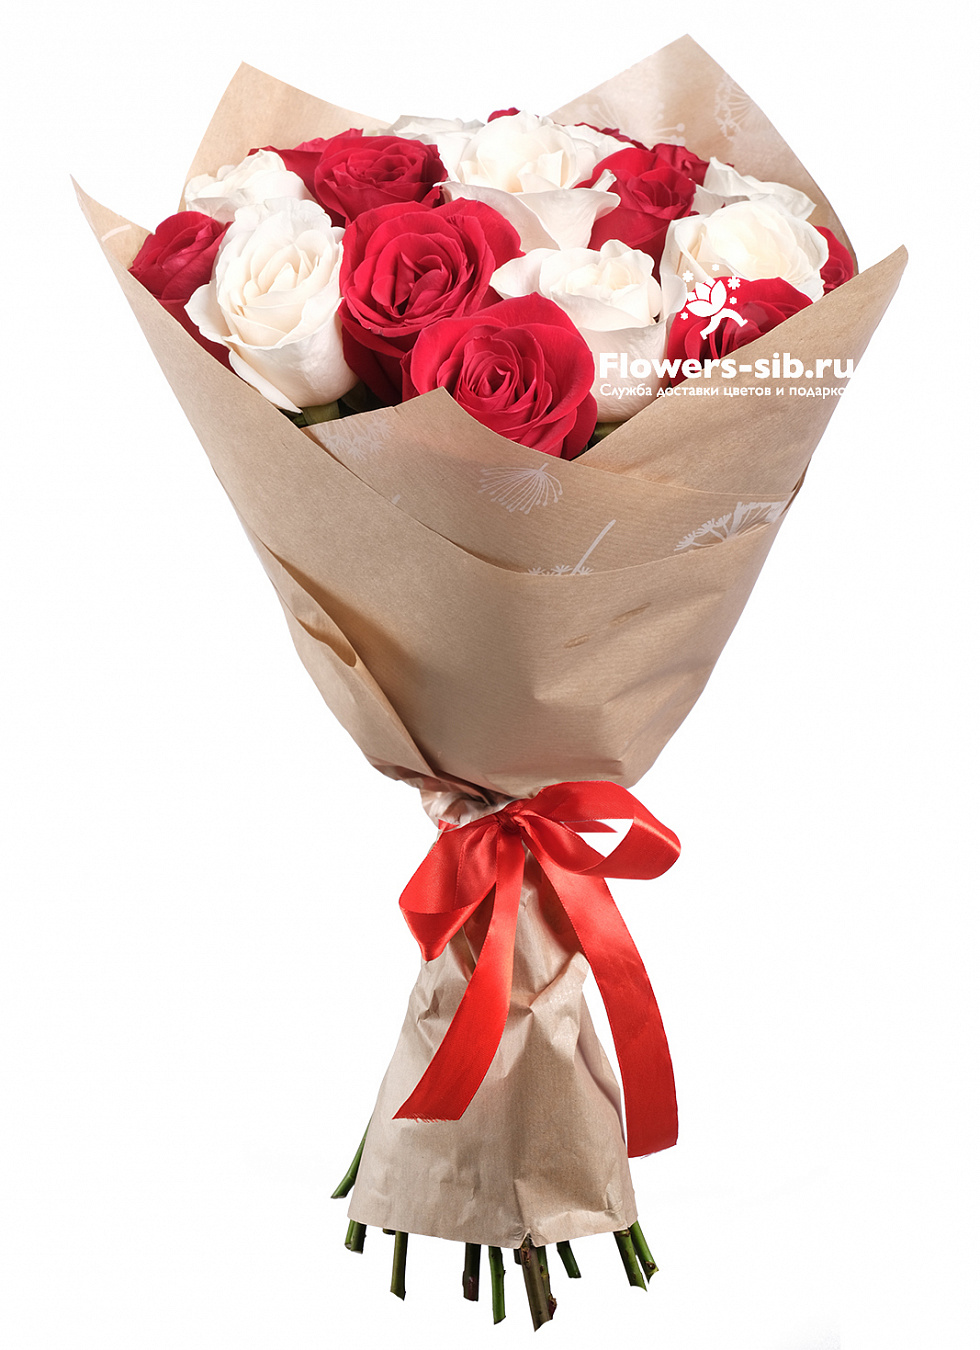 BOUQUET OF 19 ROSES